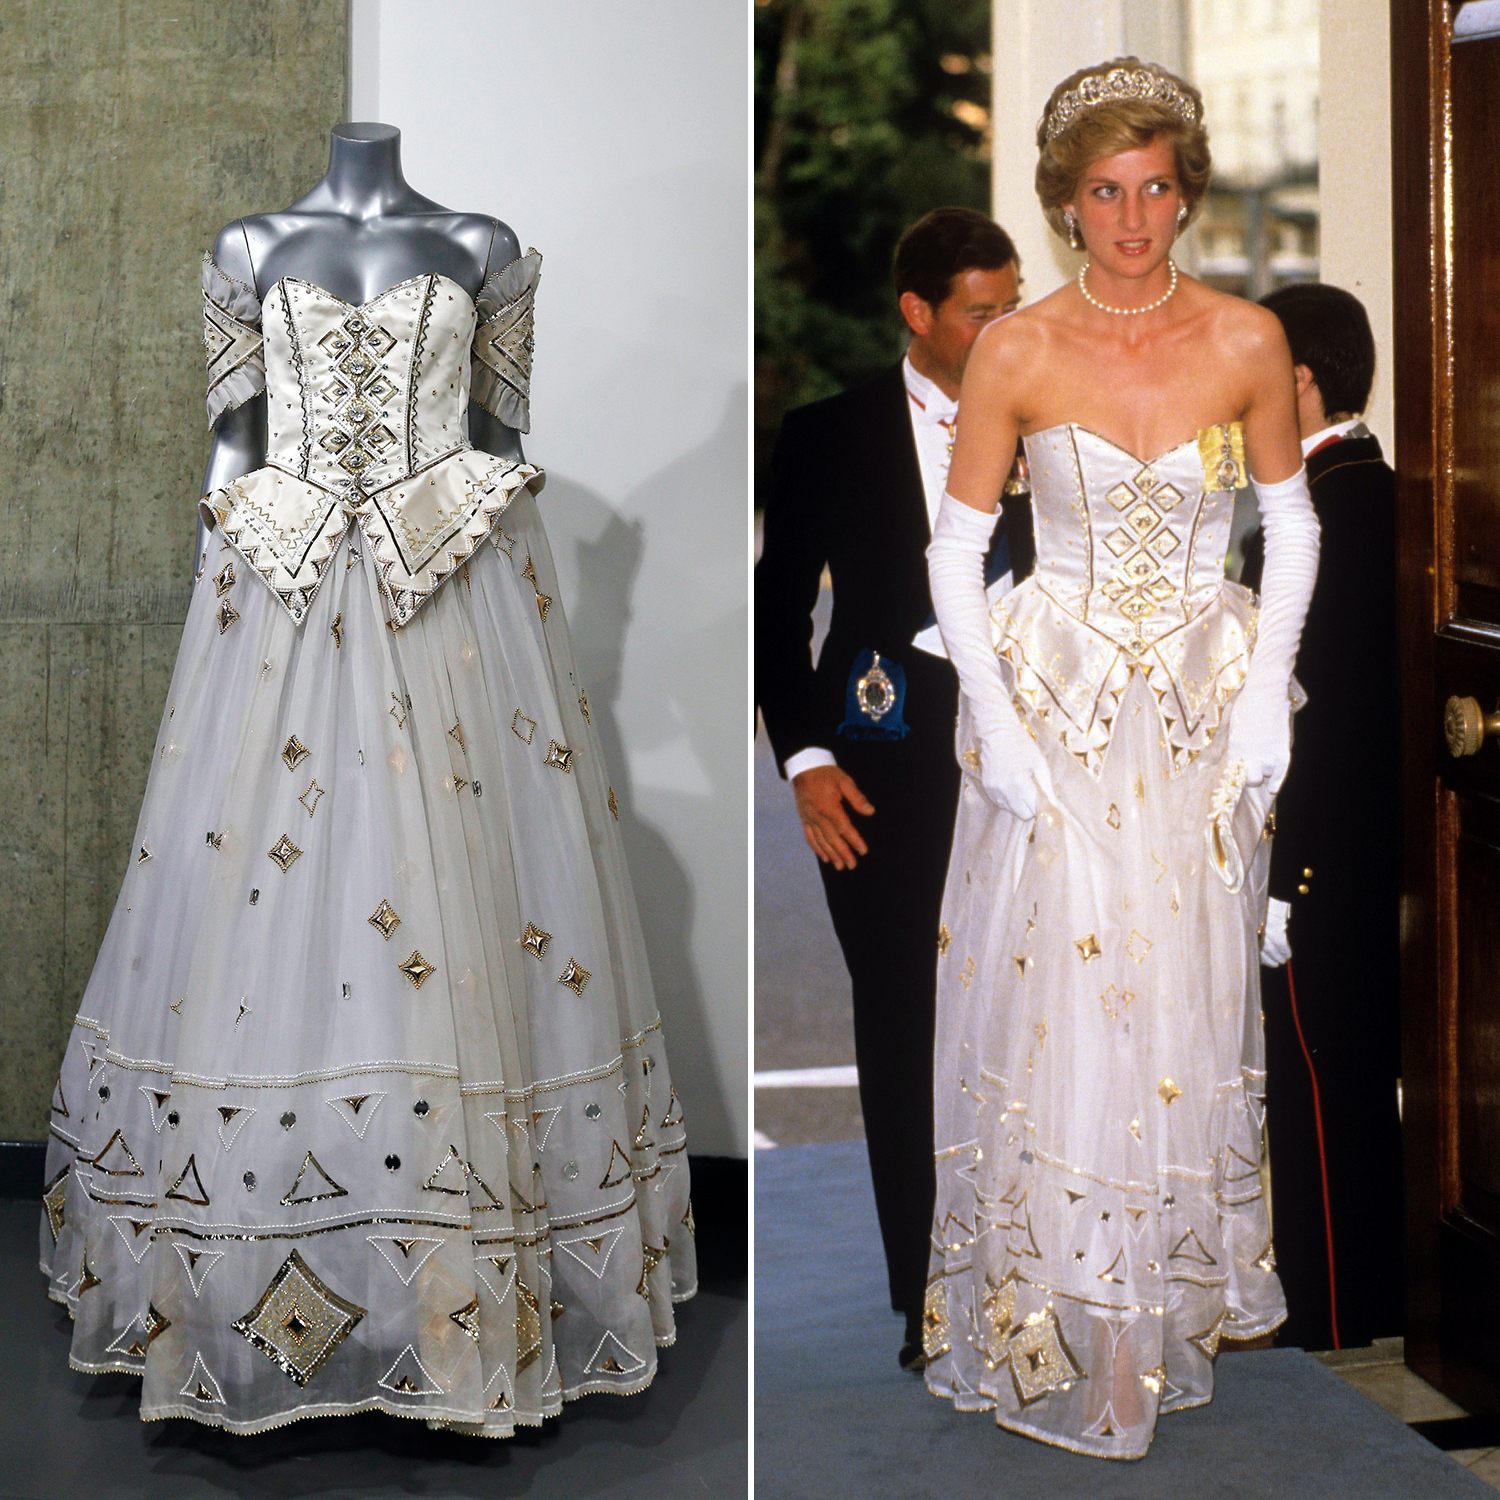 Princess Diana ball gown is sold for 167,000 at London